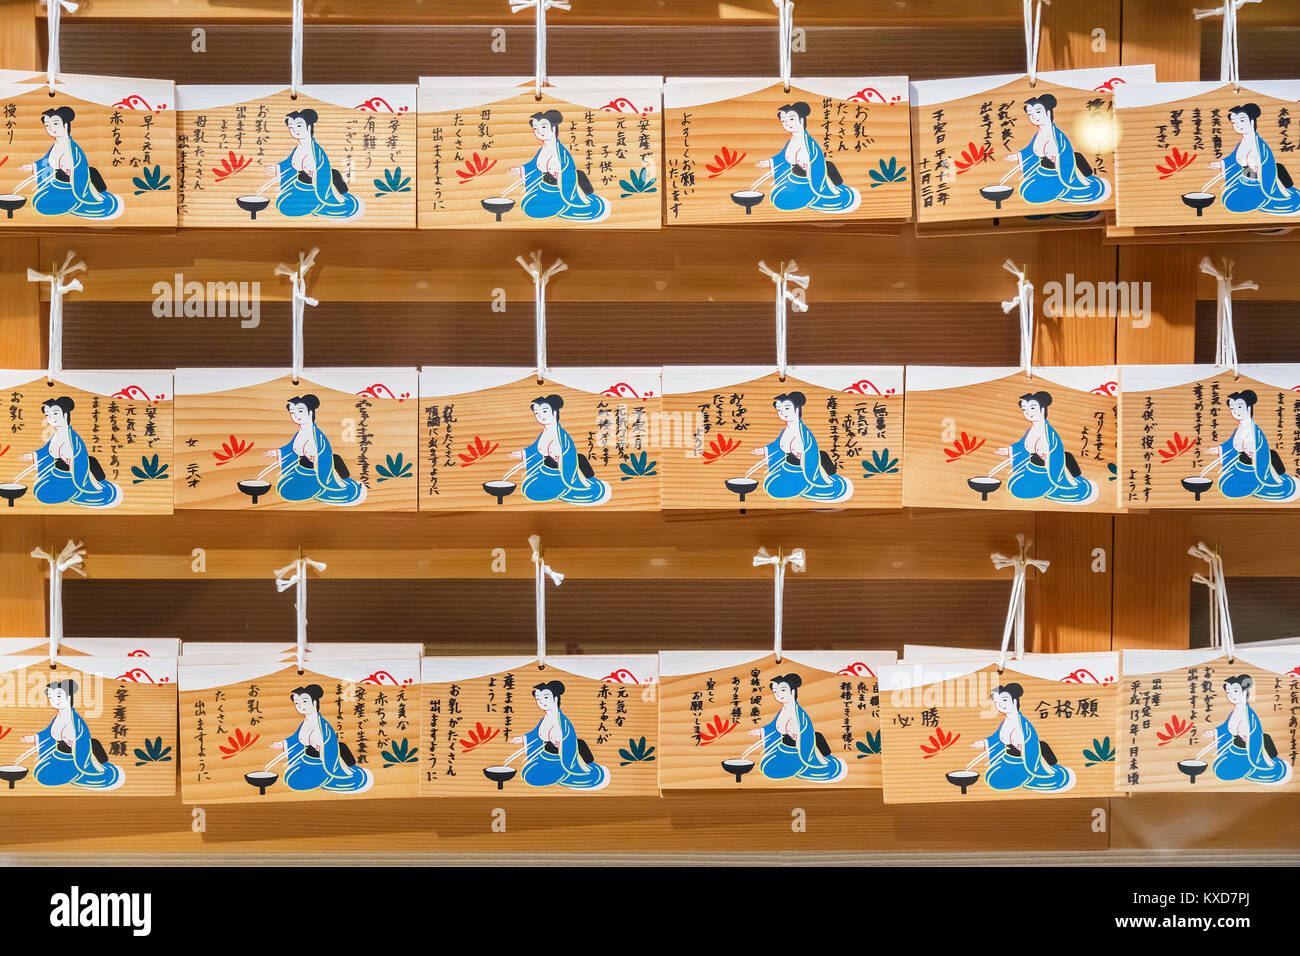 OSAKA, JAPAN - OCTOBER 27: Ema in Osaka, Japan on October 27, 2014. Ema are small wooden plaques which Shinto worshippers write their prayers then lea Stock Photo